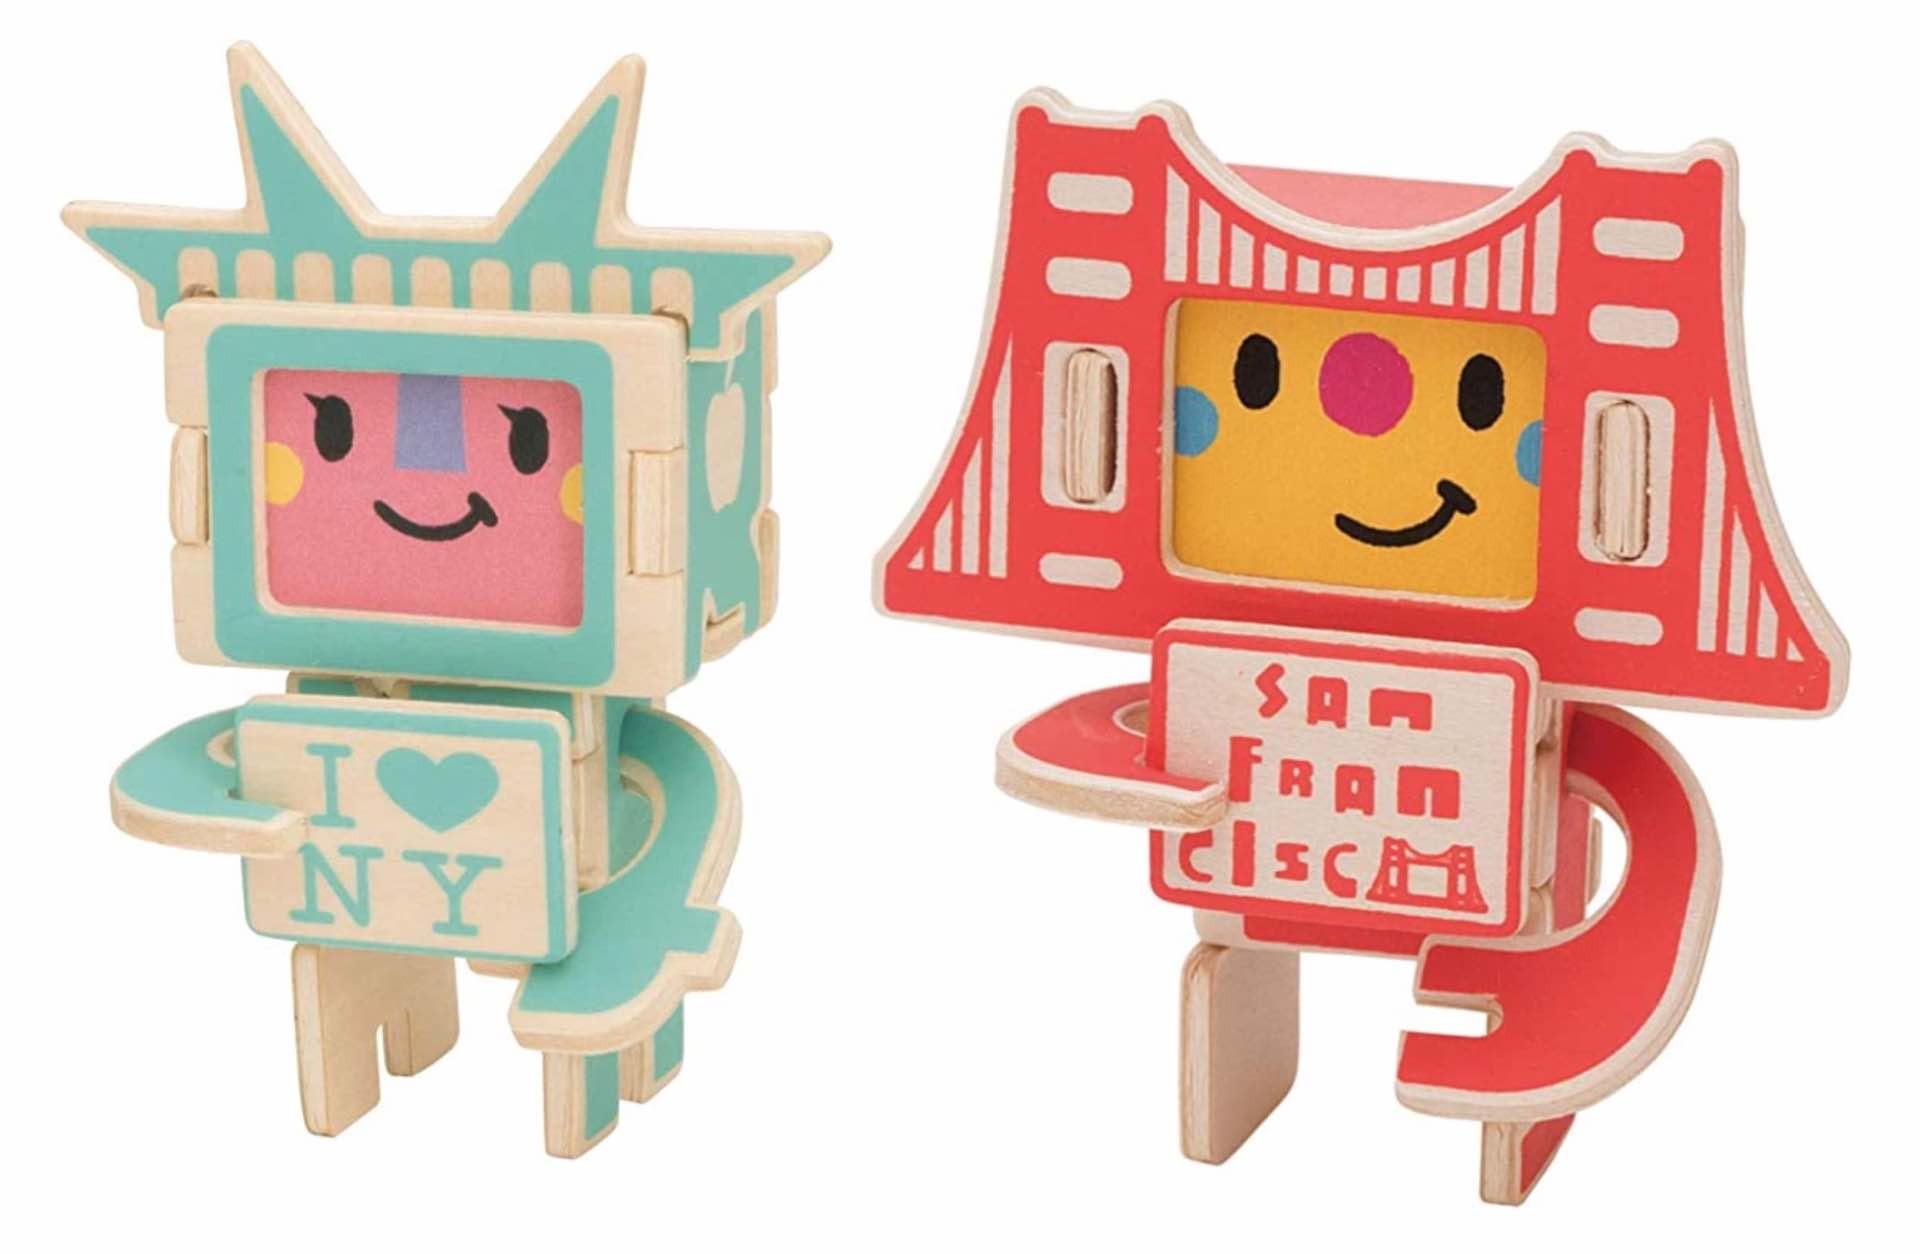 play-deco-wooden-robot-greeting-cards-nyc-sf